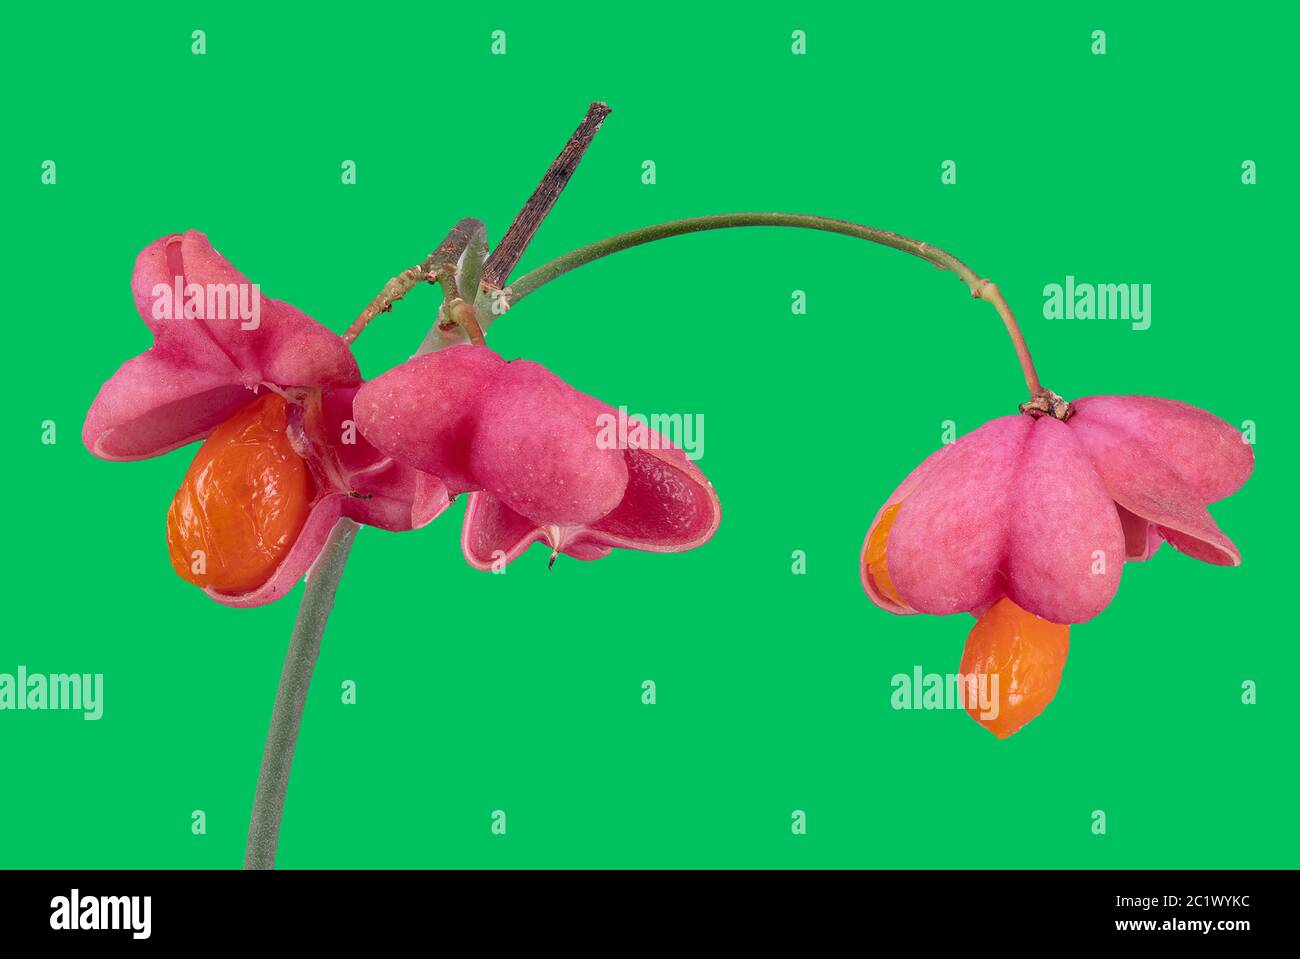 European spindle-tree (Euonymus europaea, Euonymus europaeus), fruits and seeds against green background, Germany, Oberbayern Alpenvorland Stock Photo